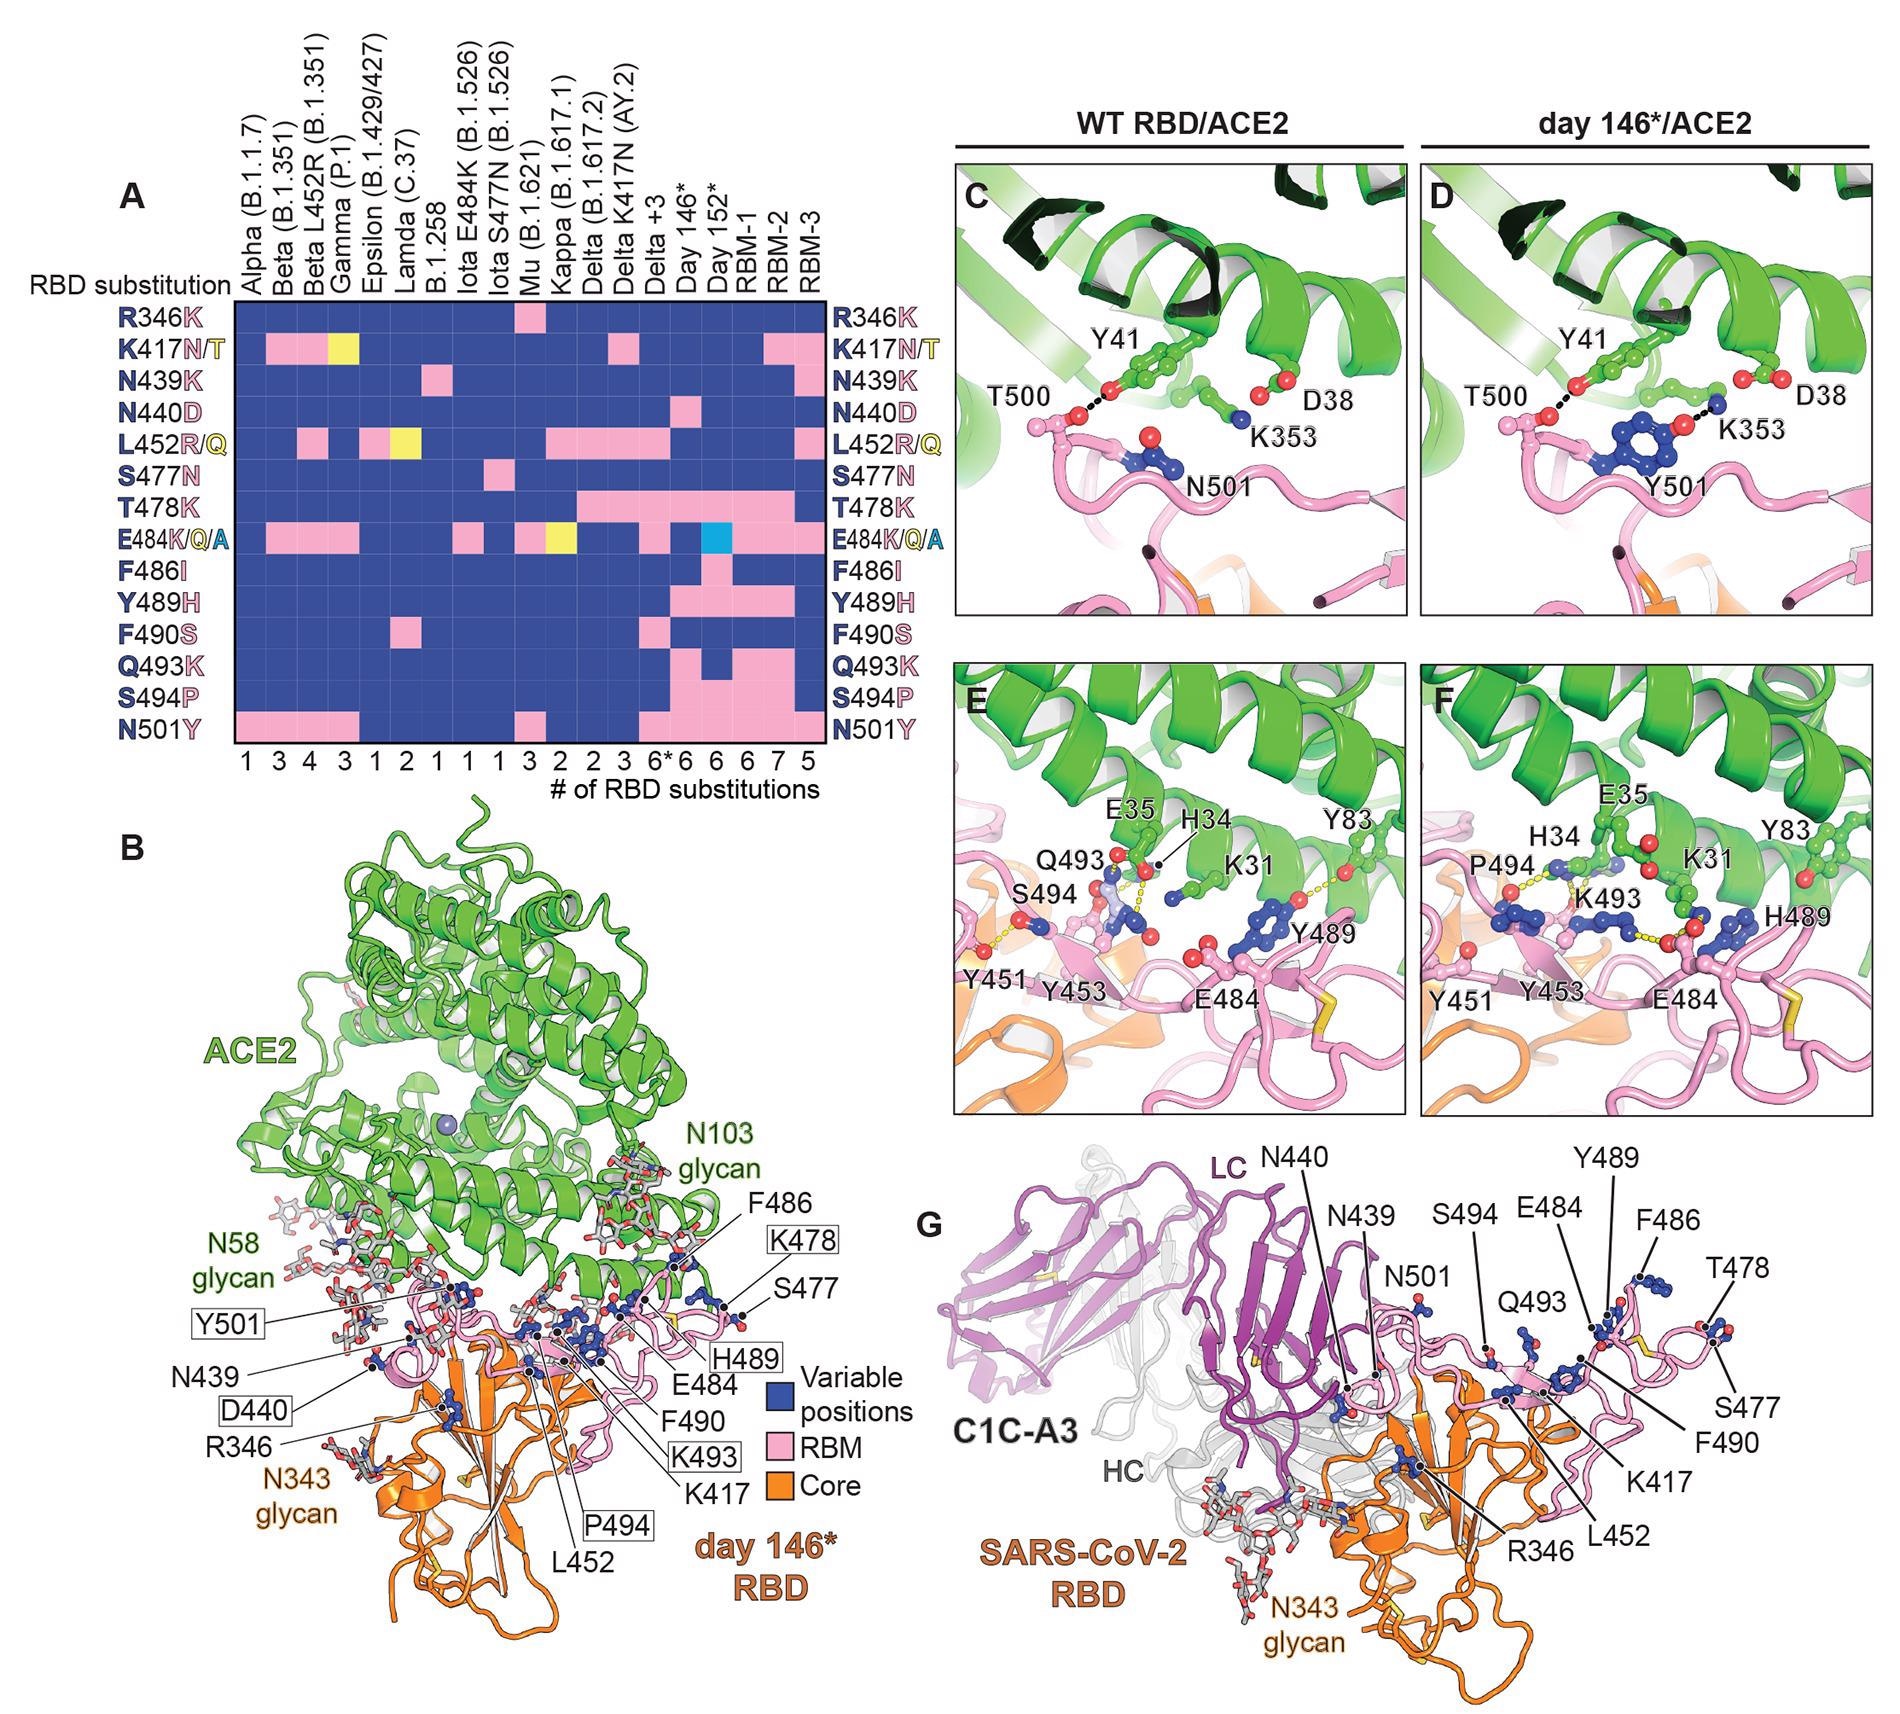 Structure of intra-host evolved RBD bound to human ACE2.(A) Key RBD substitutions discussed in the manuscript and the SARS-CoV-2 variants that contain them. (B) Day 146* RBD/ACE2 ectodomain X-ray crystal structure. RBD residues that are mutated in variants discussed in the text are shown. Boxed residues are mutated in the day 146* RBD as compared to the Wuhan-Hu-1 (wild-type) SARS-CoV-2 RBD. RBM: receptor binding motif. *In addition to the mutations that are shown, the Delta +3 variant contains an additional RBD mutation that is not shown in the schematic diagram (see table S2). (C) Wild-type RBD ACE2 contacts near N501RBD (PDB ID: 6M0J) (2). (D) Day 146* RBD contacts near Y501RBD. (E) Wild-type SARS-CoV-2 RBD ACE2 interactions near Q493RBD. (F) Day 146* RBD interactions near K493RBD. (G) cryo-EM structure of the SARS-CoV-2 RBD bound to the C1C-A3 antibody Fab. RBD residues discussed in the text are labeled.